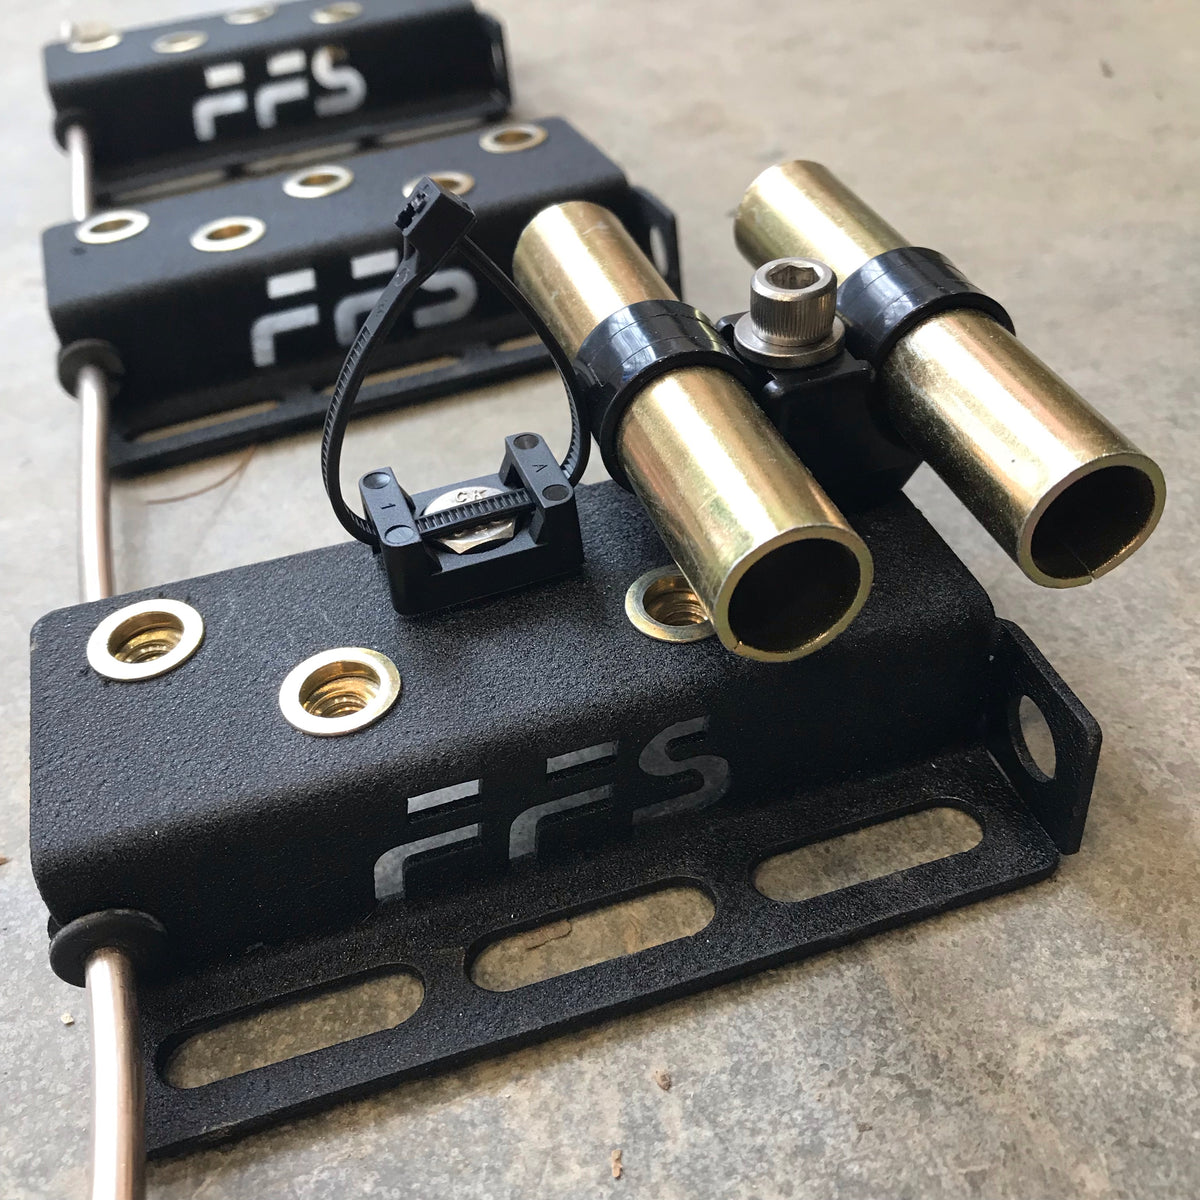 FFS FRAME LINE CLAMP (3) — Far From Stock